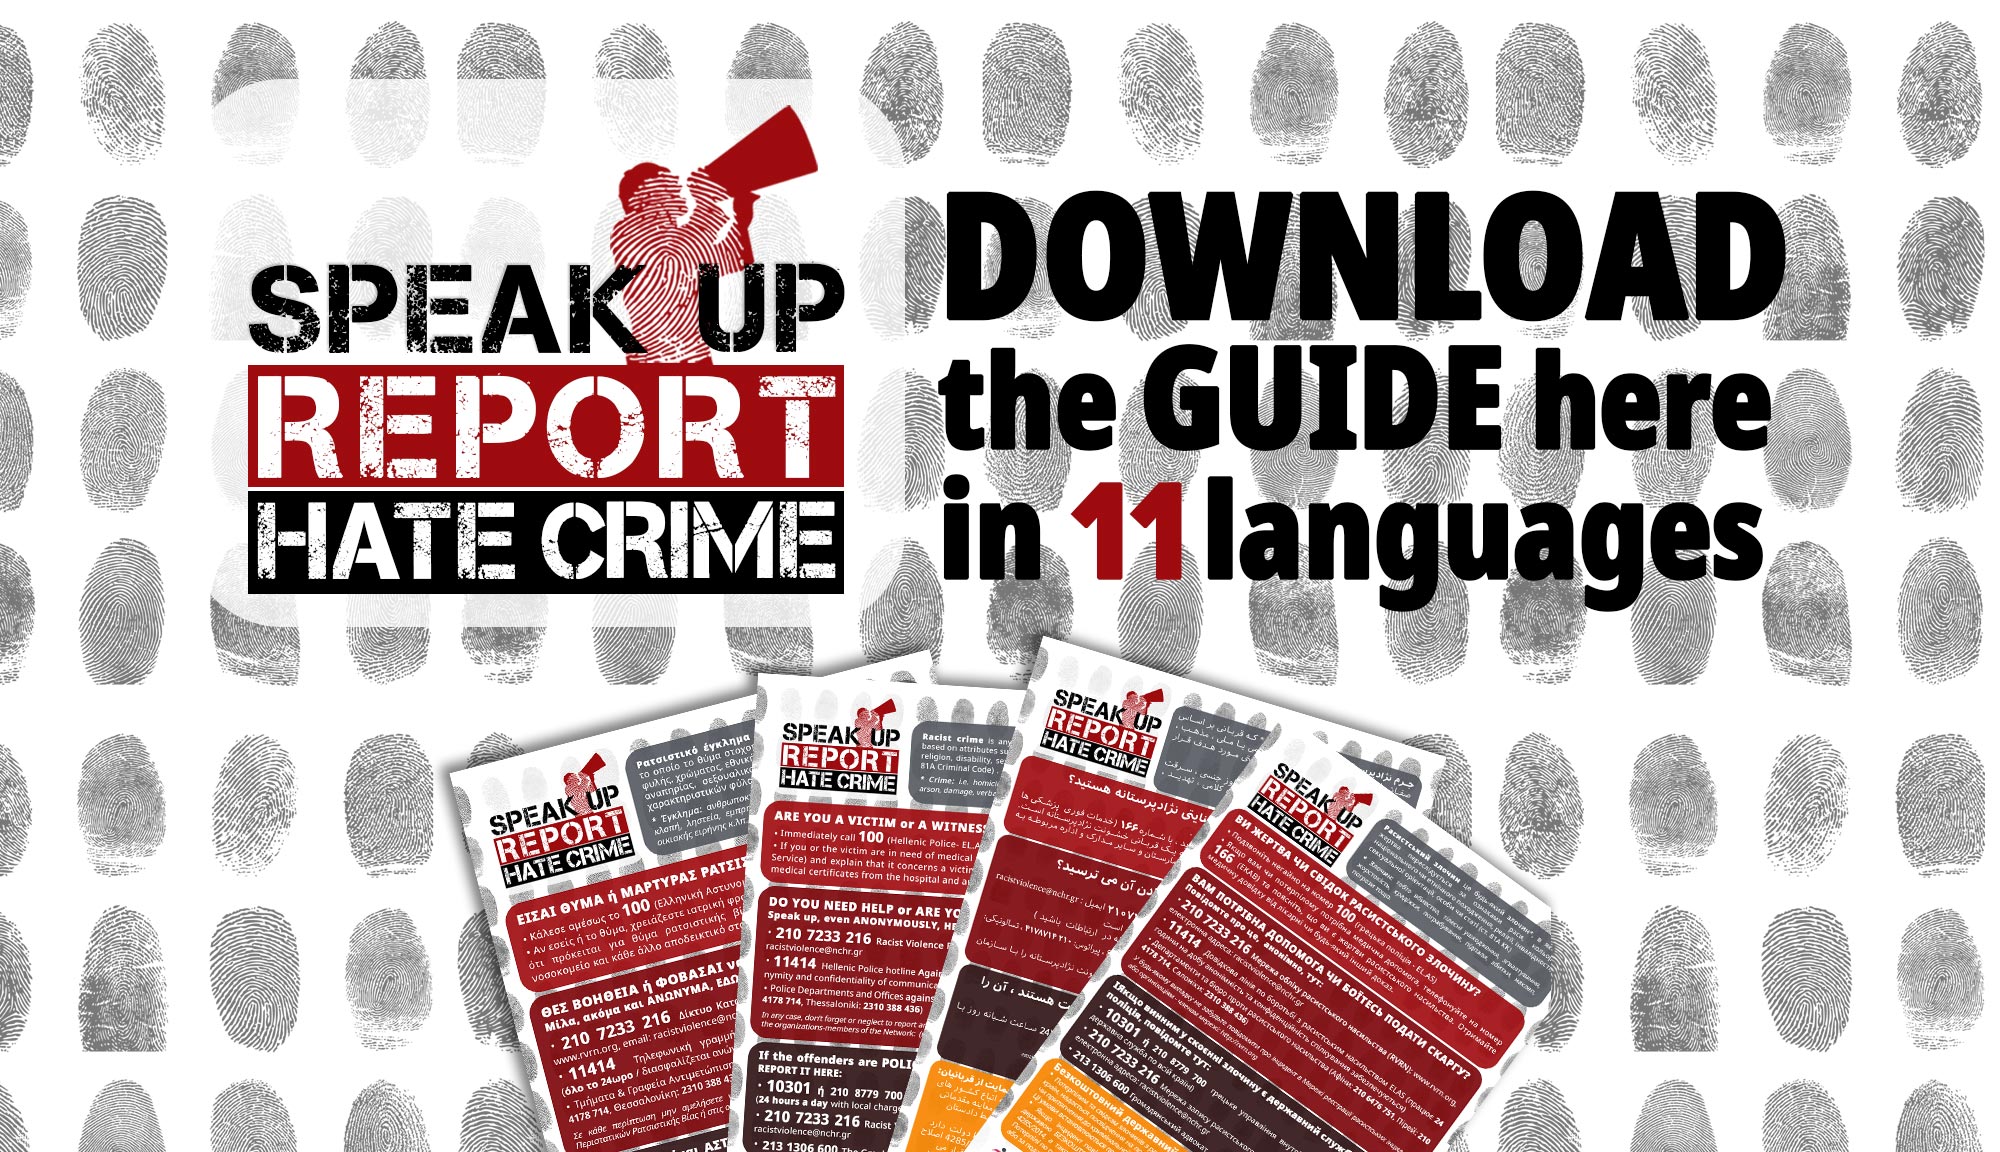 A Guide for reporting hate crime